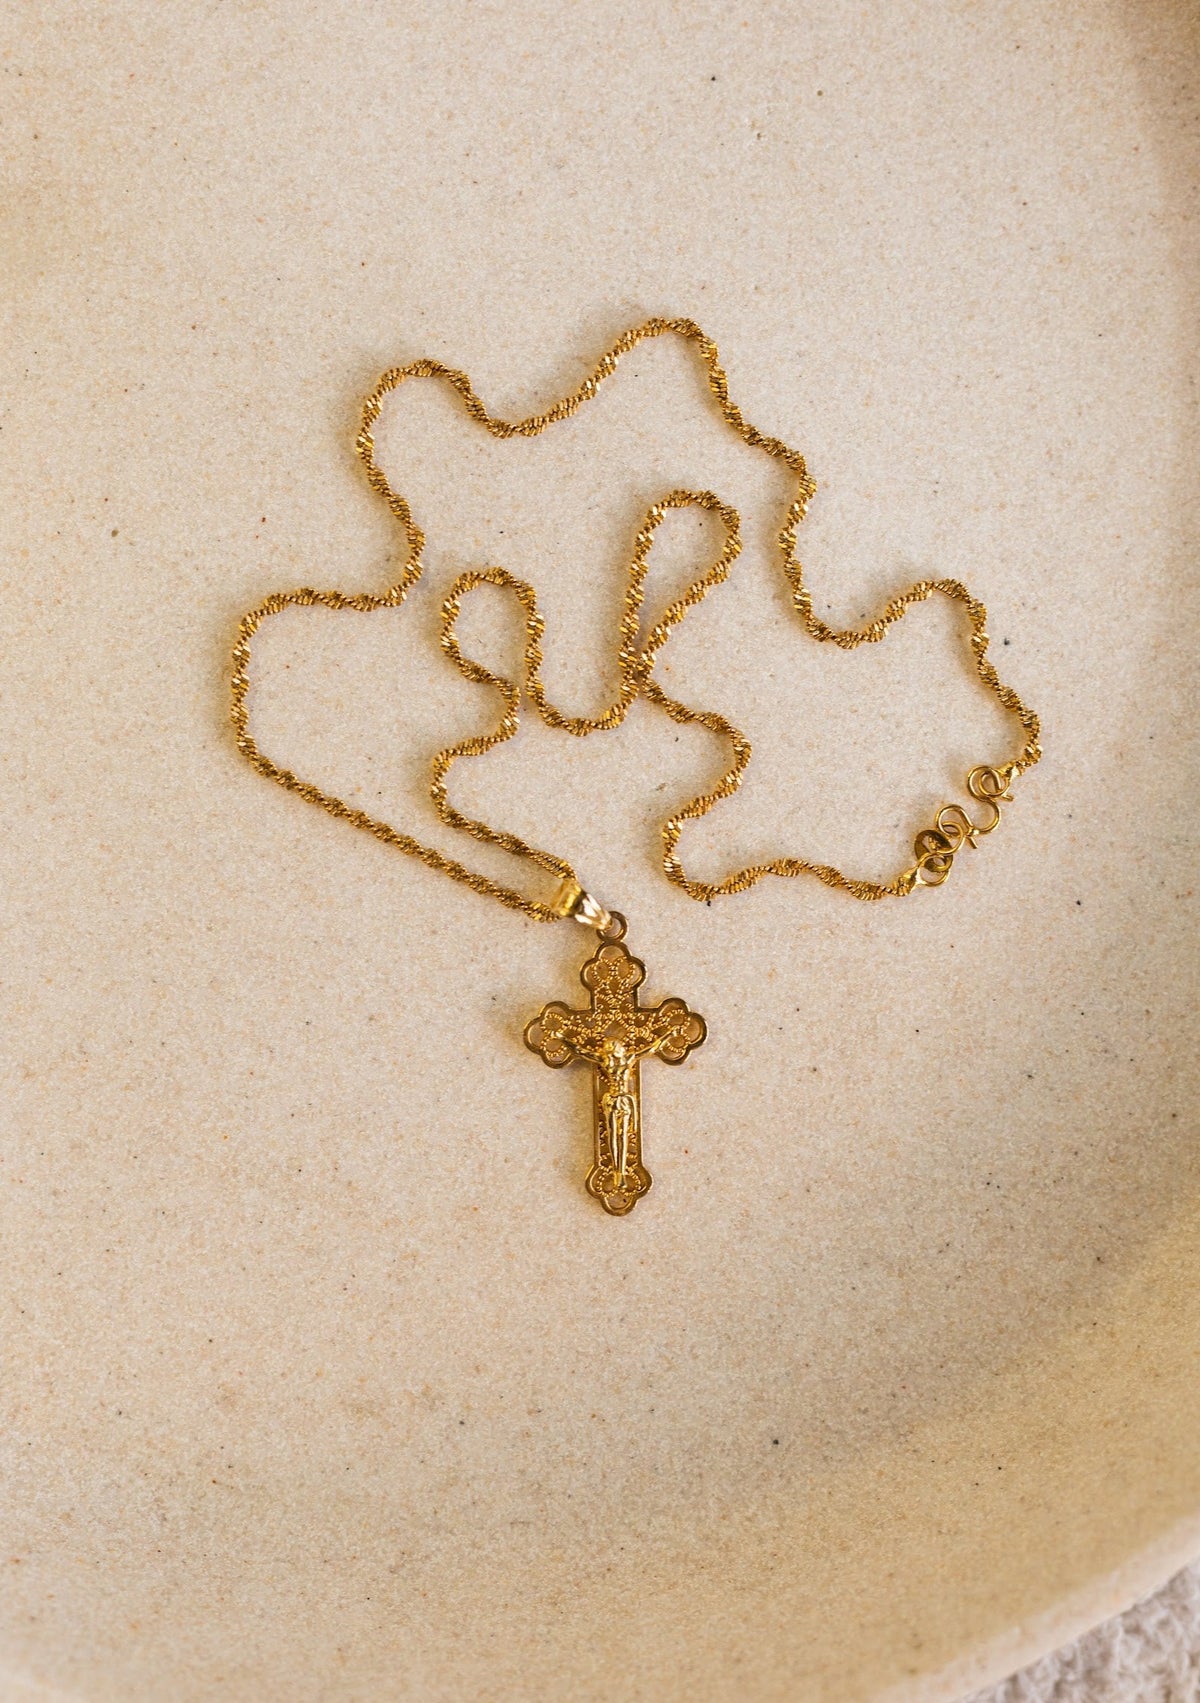 "Holy" Cross necklace